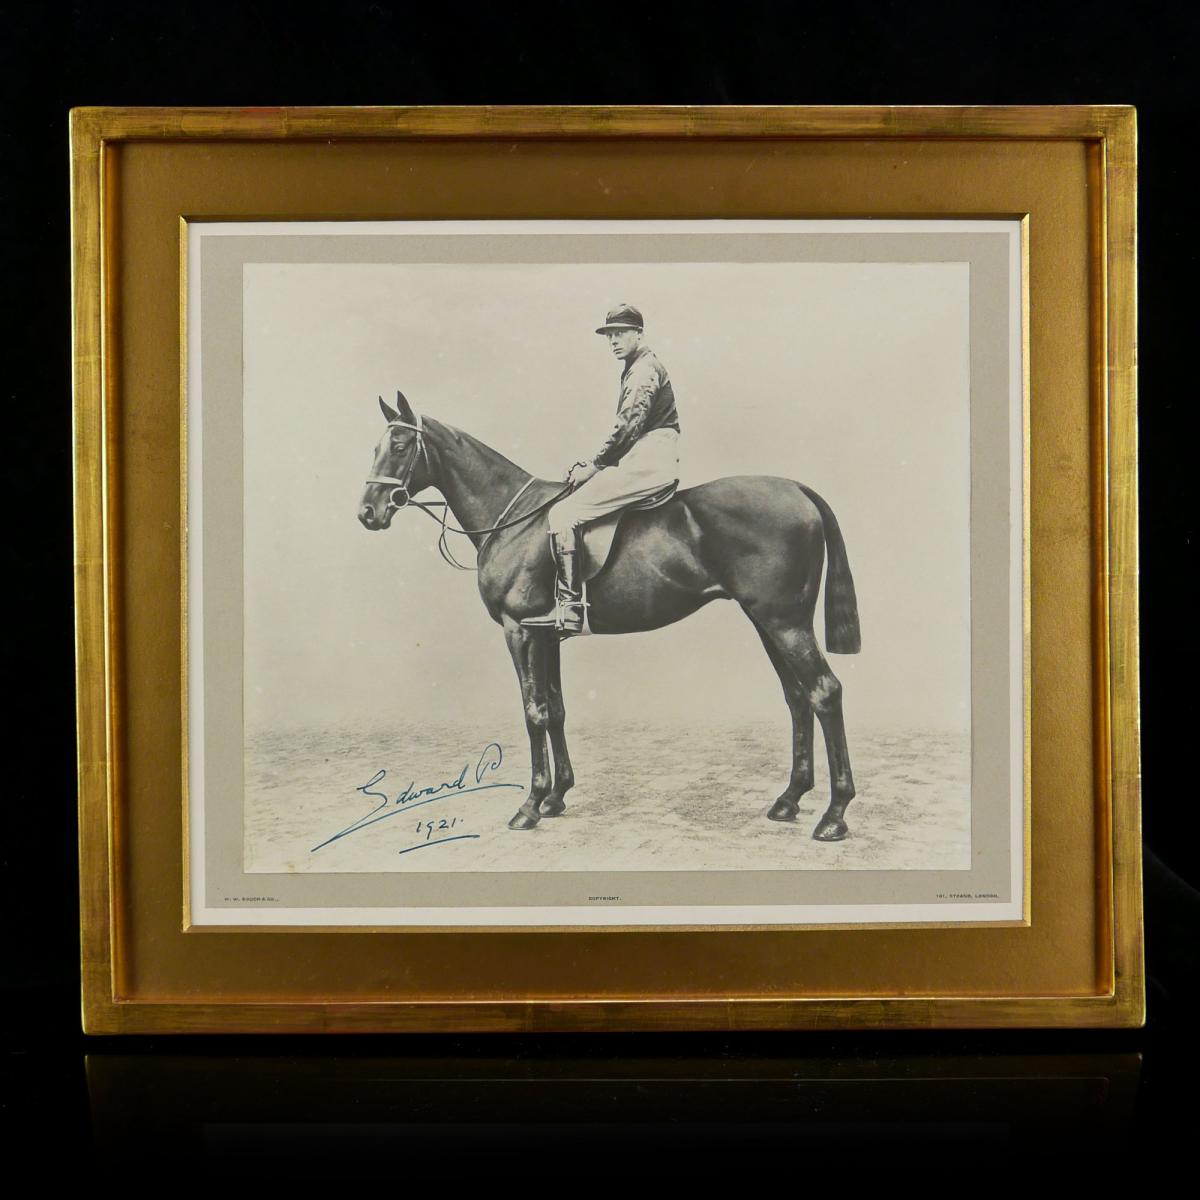 Steeplechasing - An Equestrian Photographic Portrait Edward, Prince of Wales, 1921